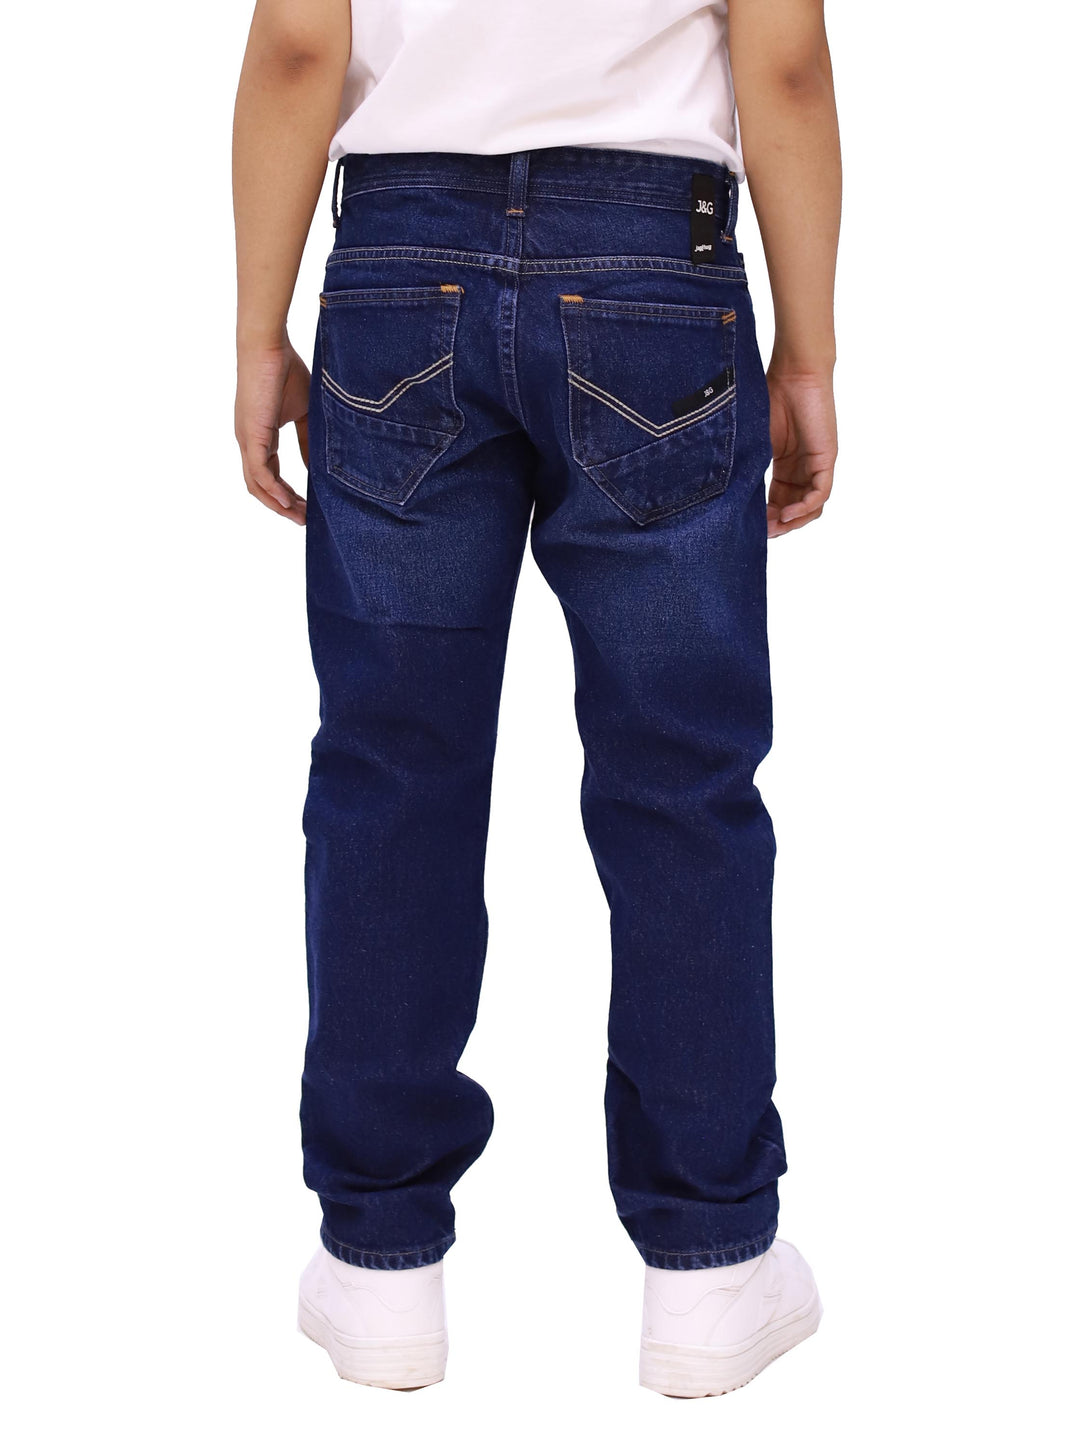 J&G Tapered Jeans